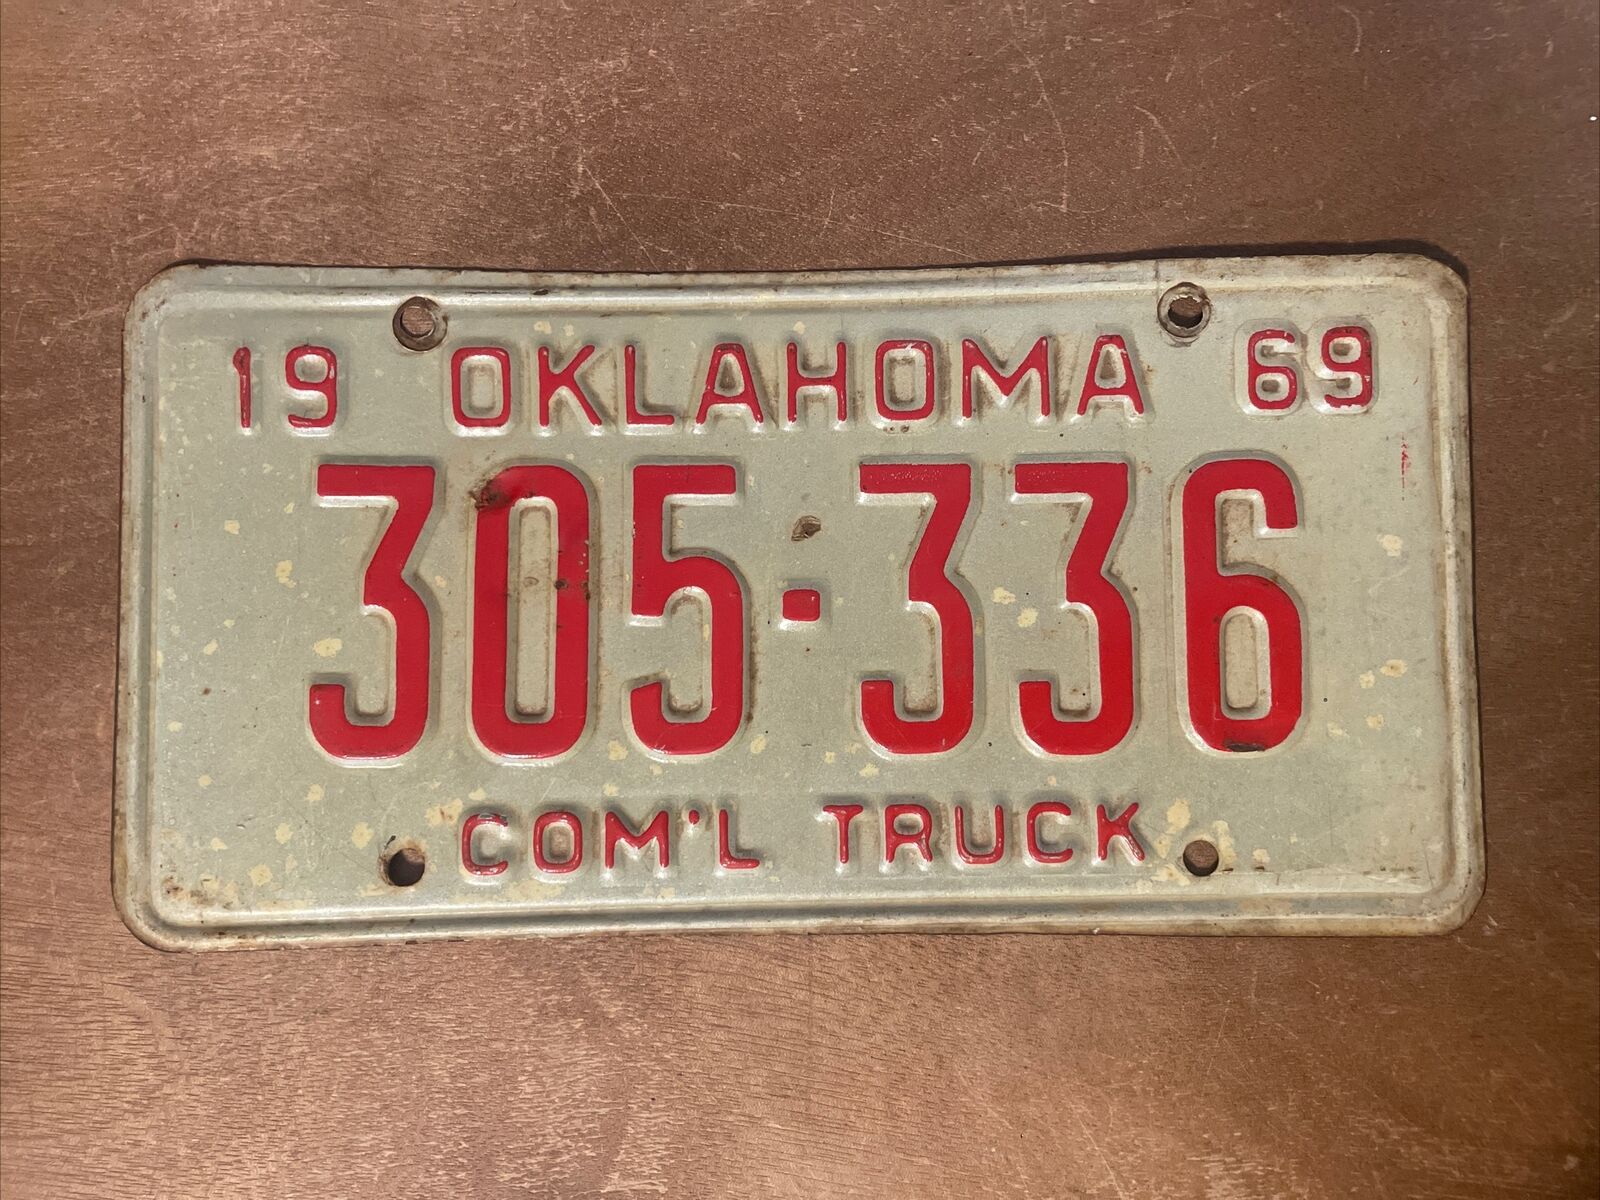 1969 Oklahoma License Plate Commercial Truck # 305-336